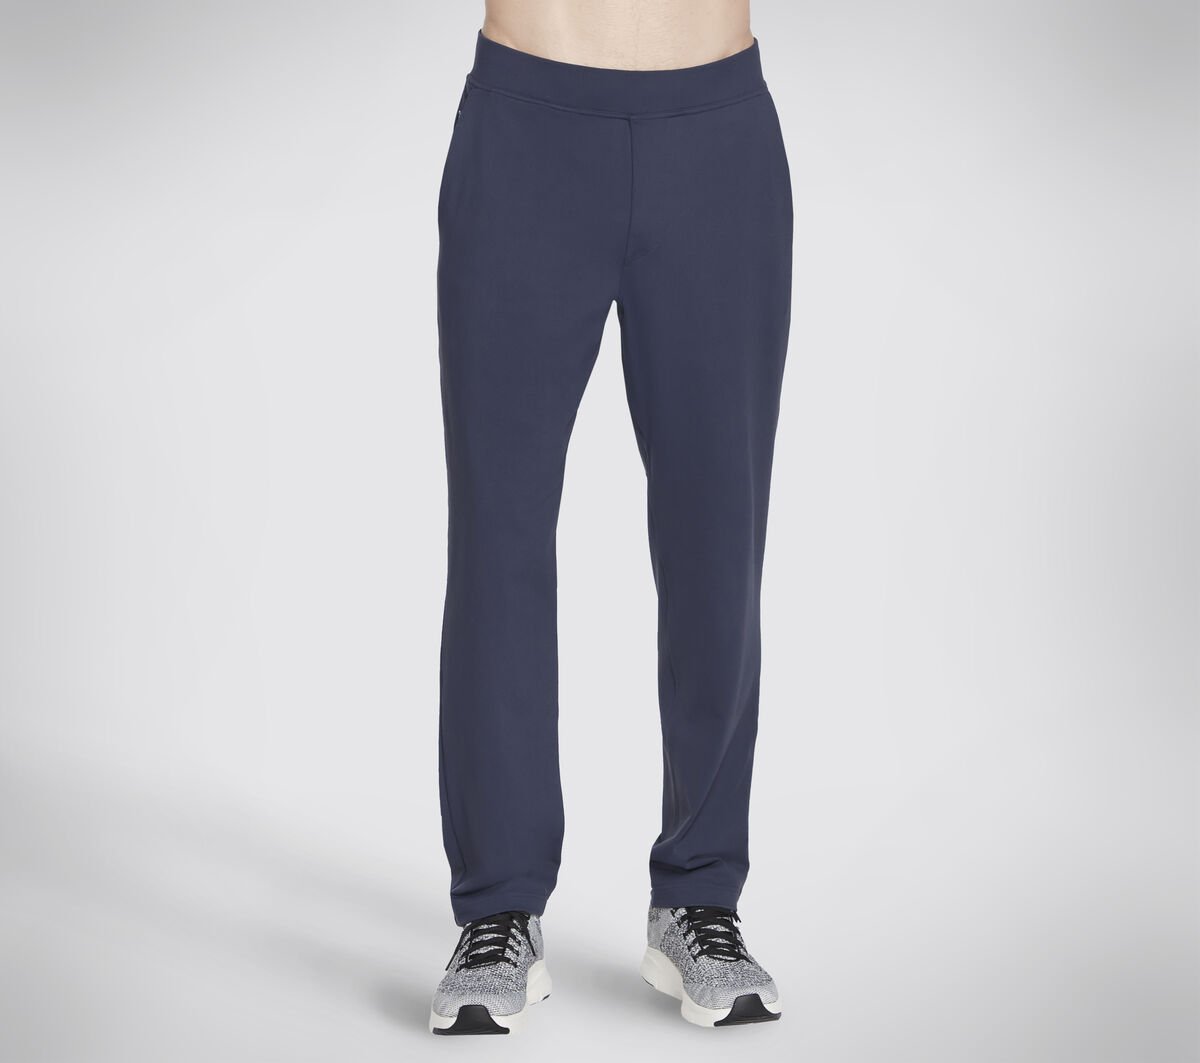 Clothing & Shoes - Bottoms - Pants - Skechers Go Knit Ultra